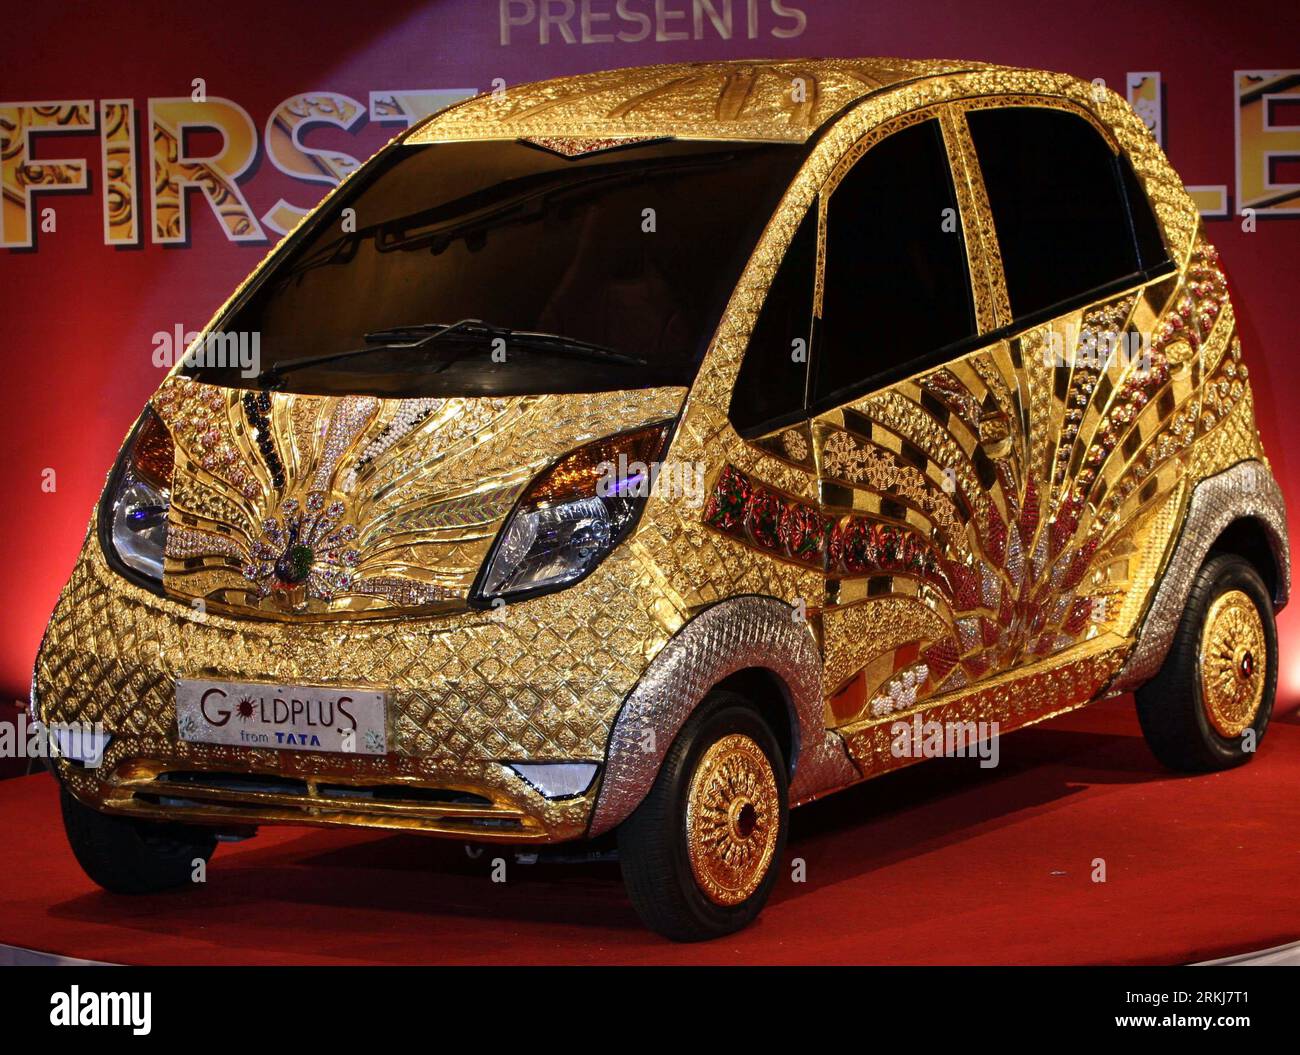 Bildnummer: 56031058  Datum: 19.09.2011  Copyright: imago/Xinhua (110919) -- MUMBAI, Sept. 19, 2011 (Xinhua) -- The World s first Gold jewelry car, claimed by Tata, is seen during an unveiling ceremony in Mumbai, India, Sept. 19, 2011. About 80 kg of 22 karat gold, approximately 15 kg of silver and 10,000 gemstones were used to decorate the Tata Nano car. (Xinhua/Stringer) INDIA-MUMBAI-TATA-GOLD JEWELRY CAR PUBLICATIONxNOTxINxCHN Wirtschaft kurios Aufmacher premiumd x2x xsk 2011 quer  o0 Silber, Edelsteine, Auto, Fahrzeug, Goldplus, Tata, Objekte, Luxus     56031058 Date 19 09 2011 Copyright I Stock Photo